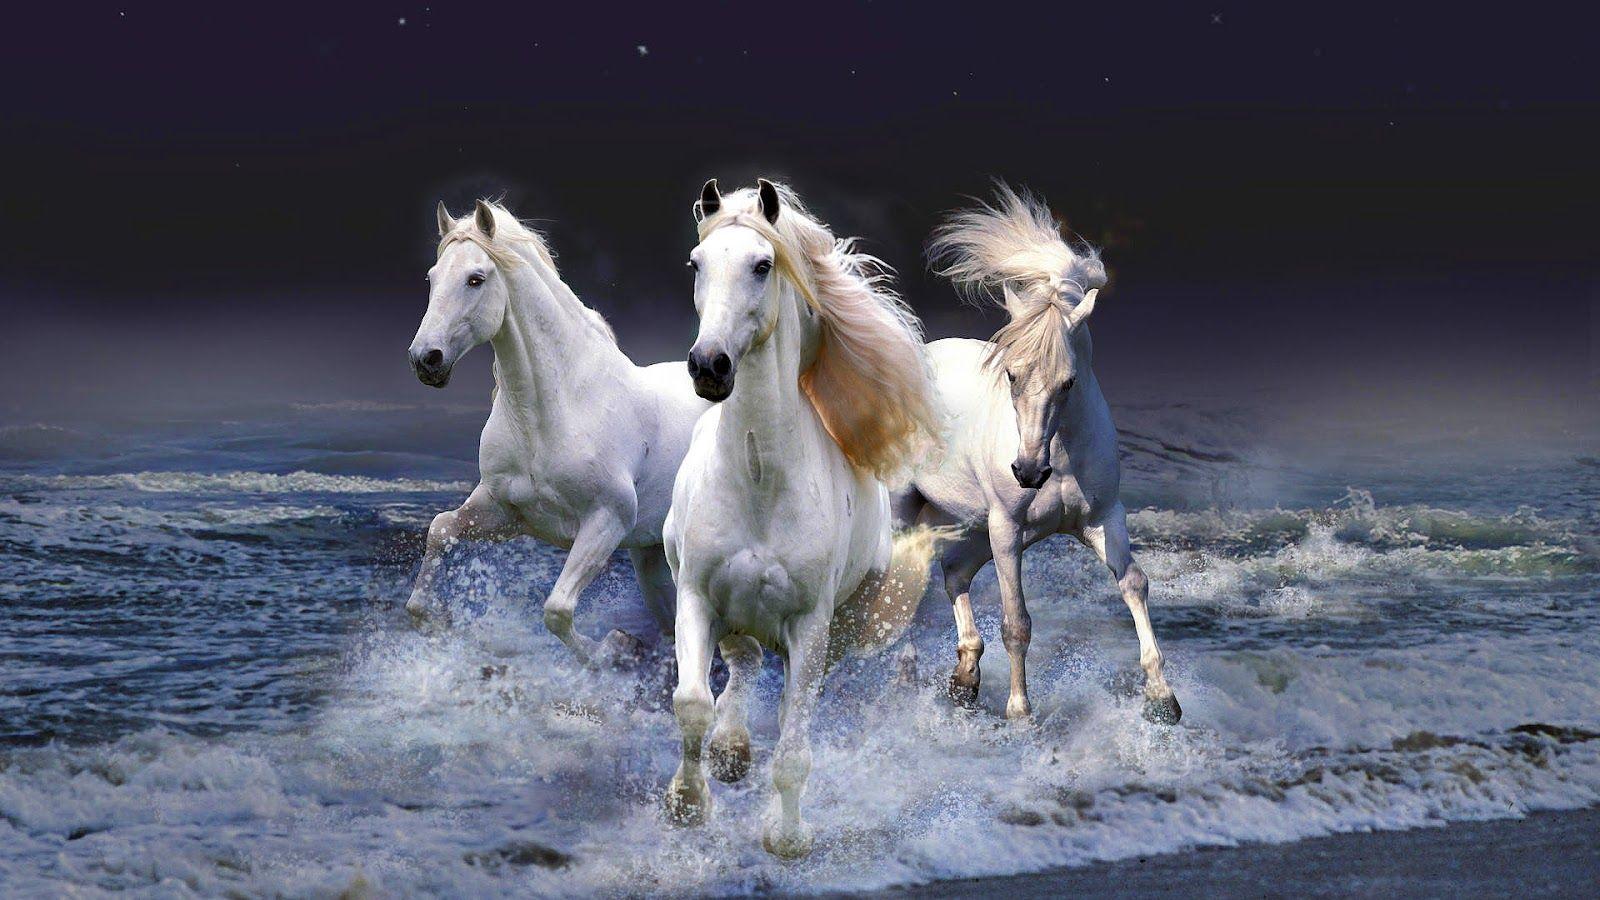 Animated horse Background.. horses running through water or